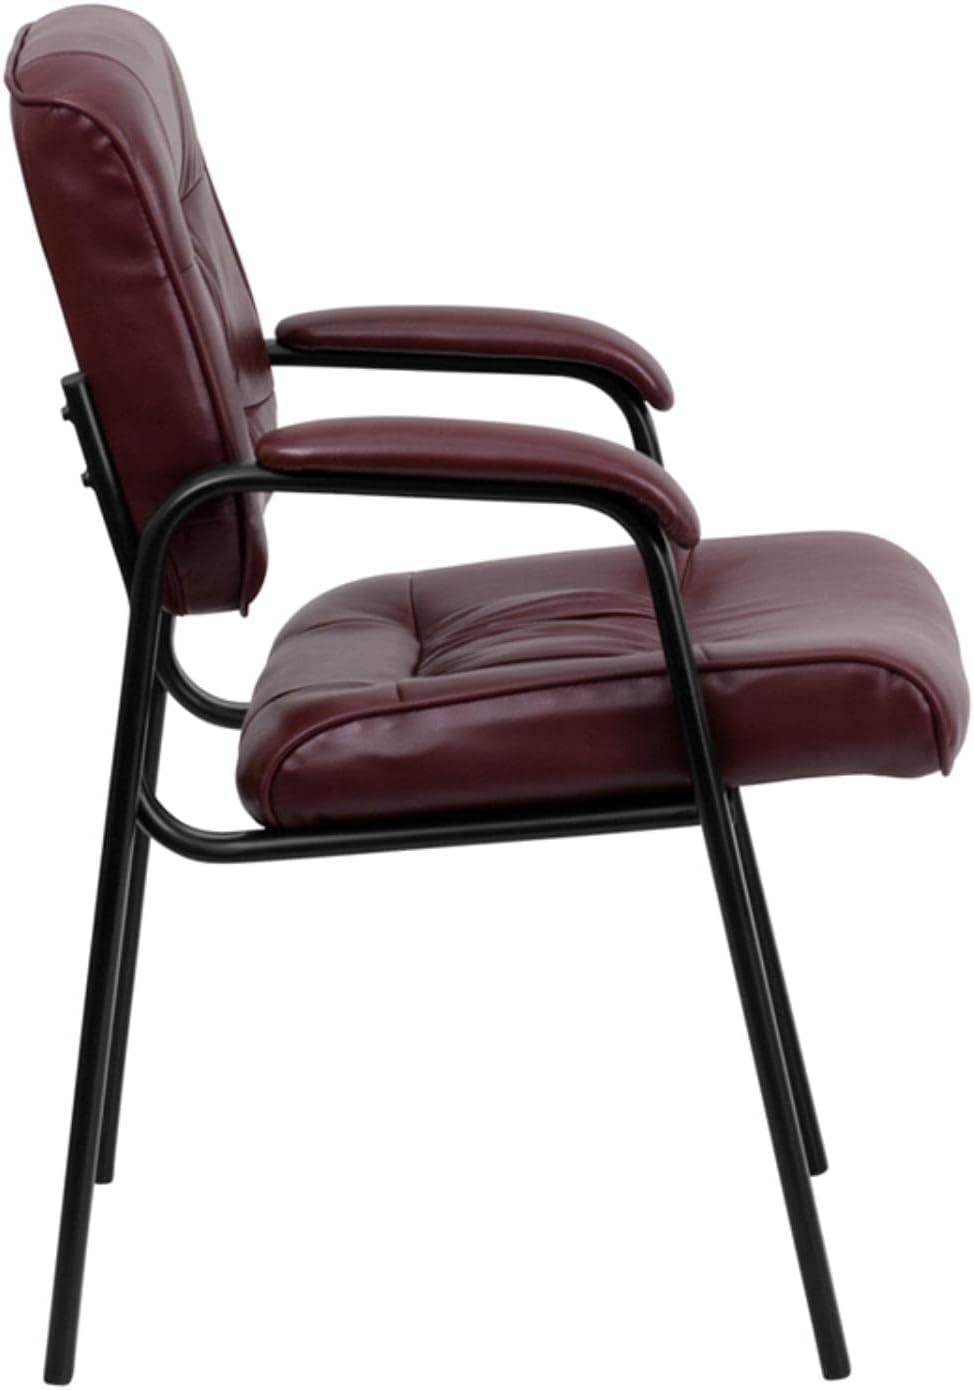 Burgundy LeatherSoft High Back Swivel Executive Chair with Metal Frame